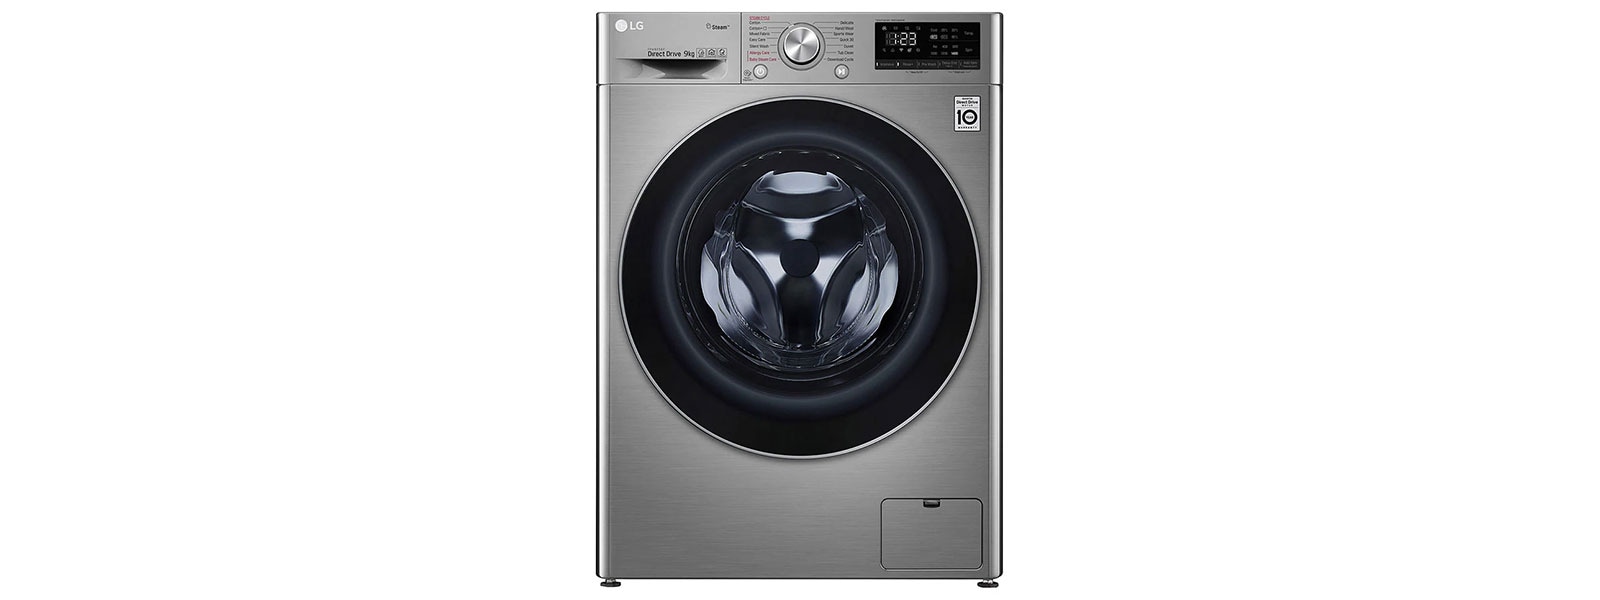 Top 15 cleaning tips for LG washing machines